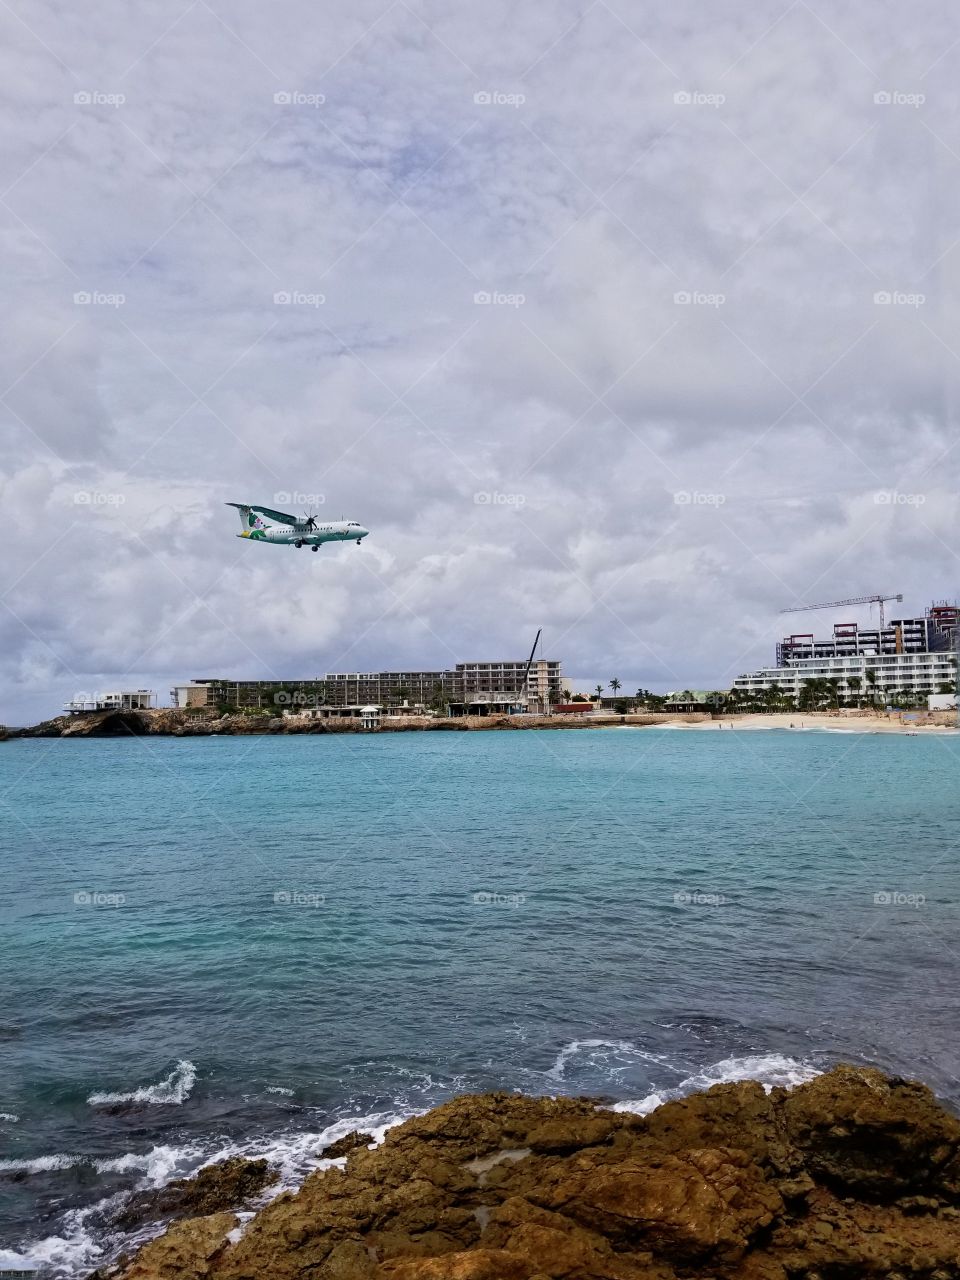 Airantilles coming in for a landing at Maho beach St Maarten